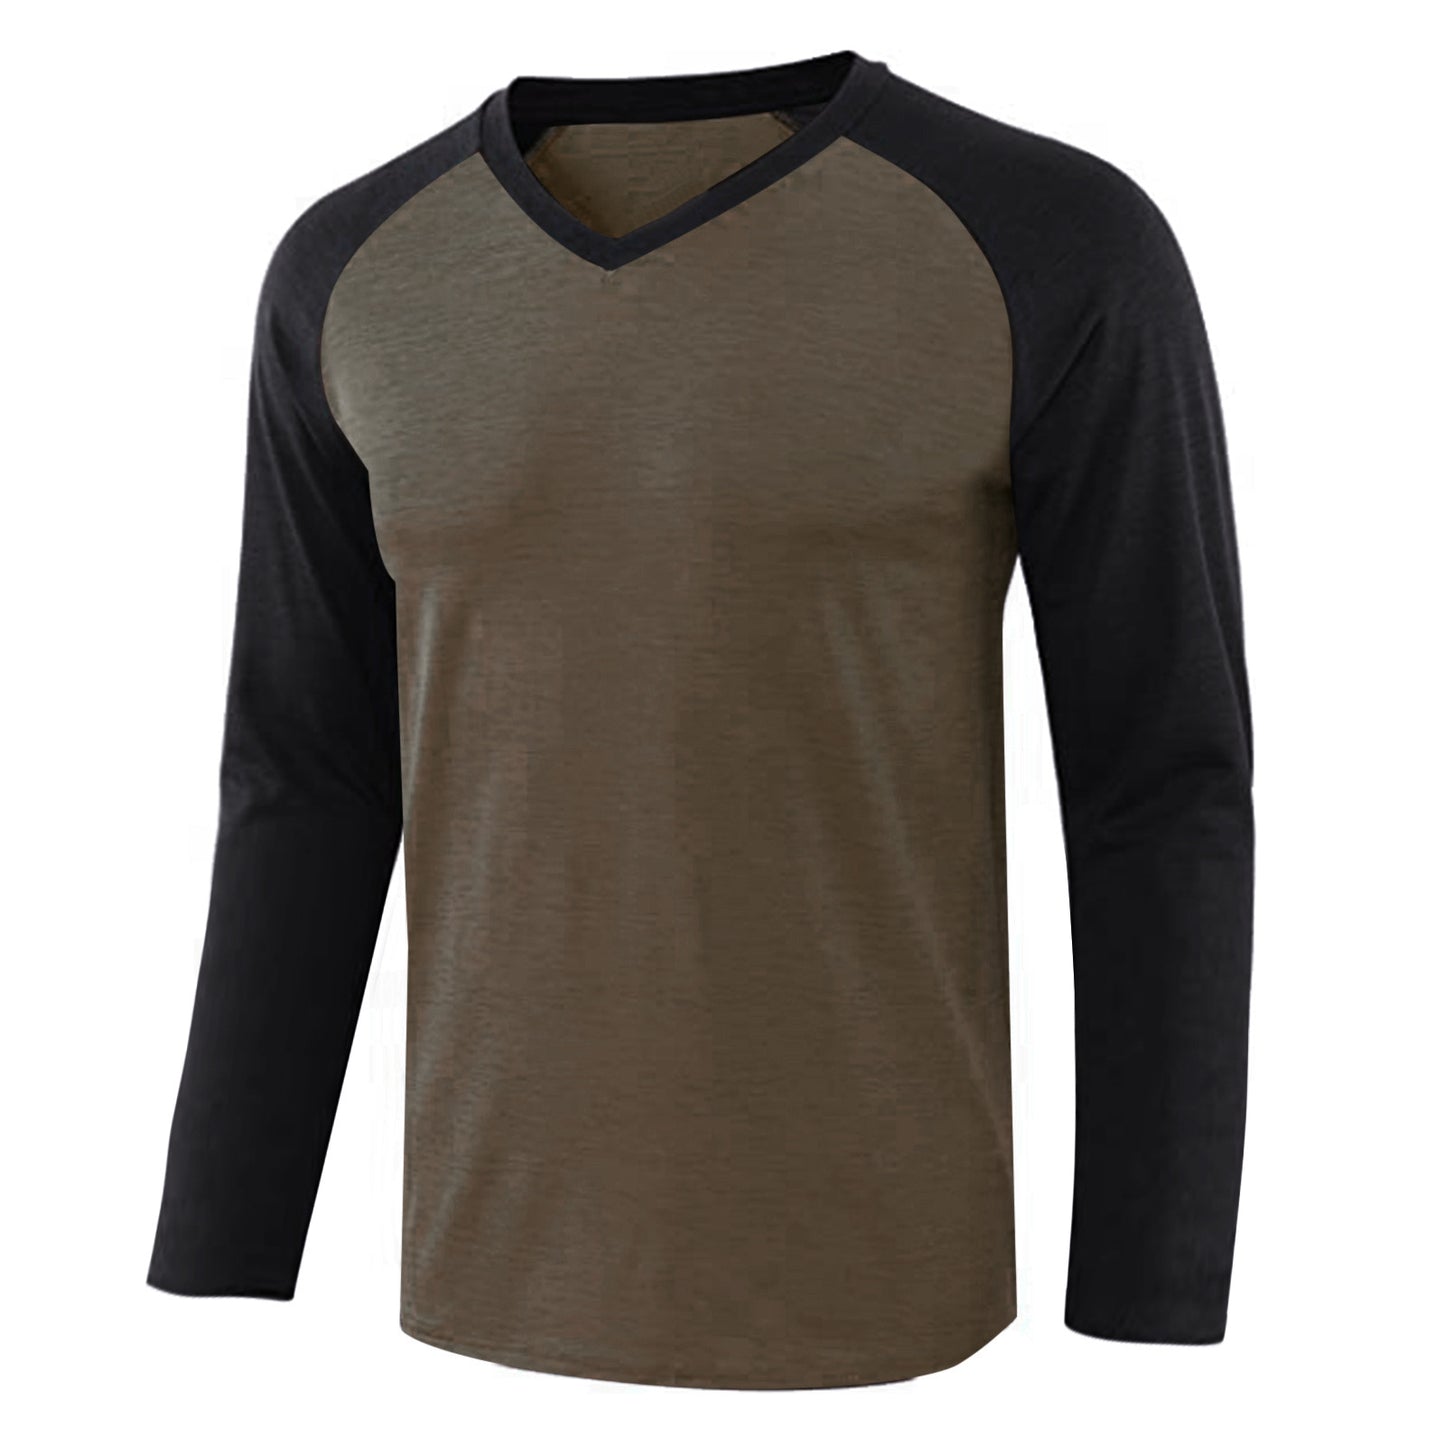 Men's Long-sleeved Contrast Raglan Sleeve T-shirt - Trotters Independent Traders